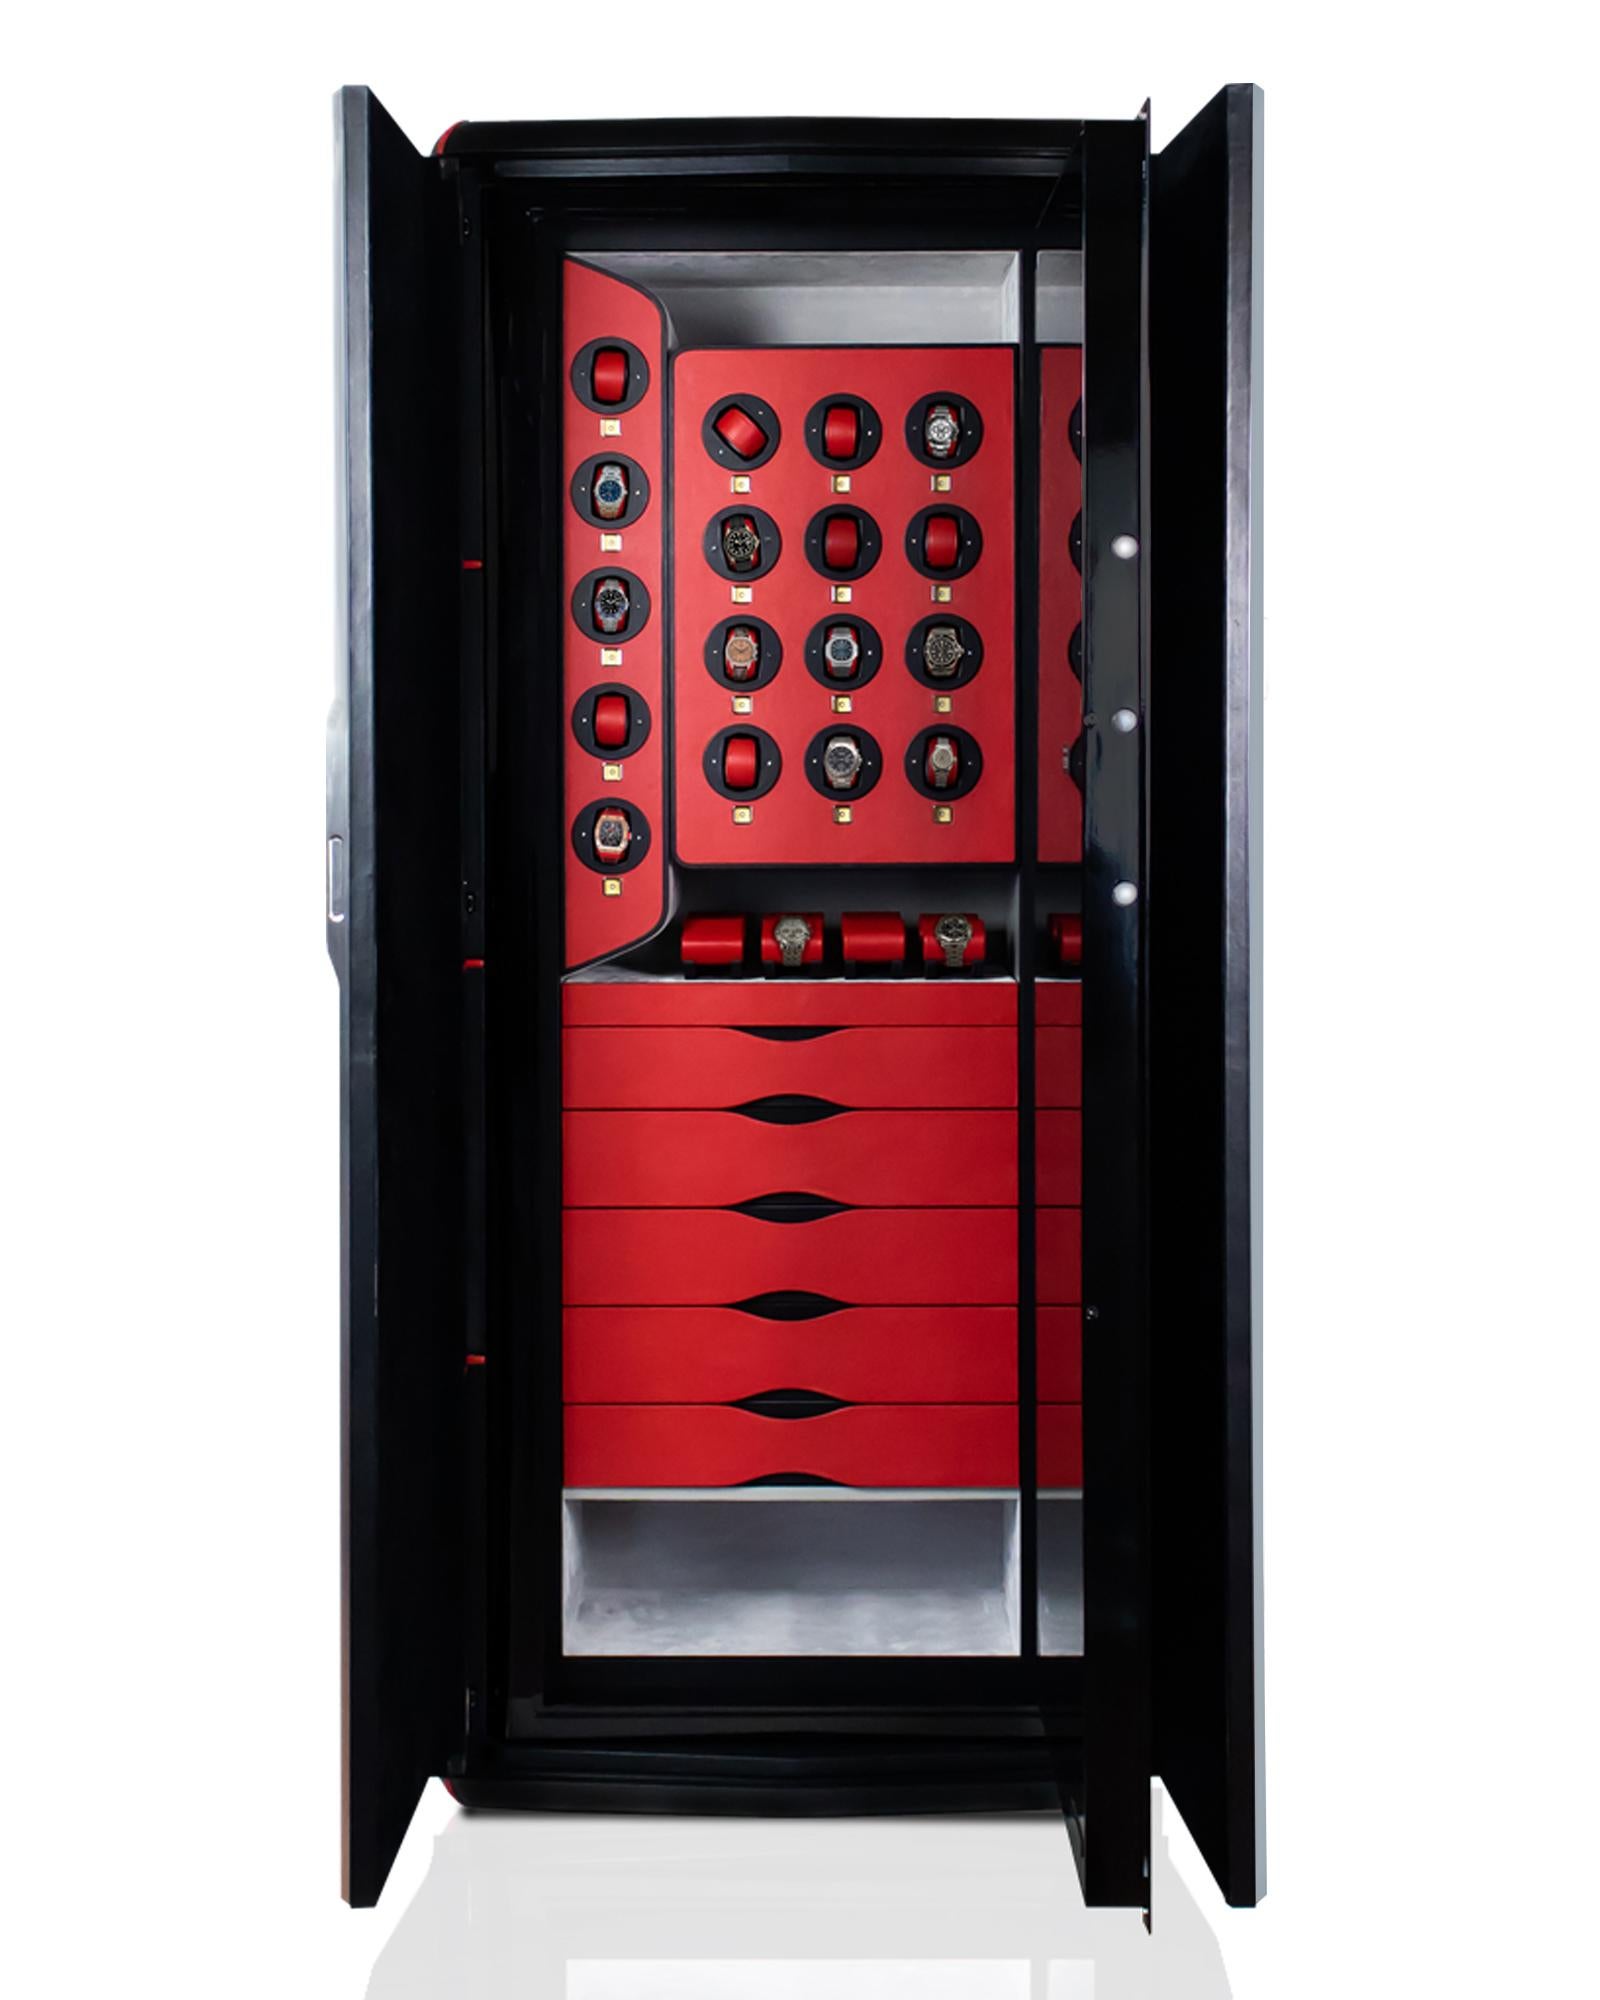 Armoured armoire for watches and jewels lined in black leather and details in red leather. Accessories in satin palladium. Inside the safe 17 watch winders made in Switzerland and a secret compartment.
Drawers covered in leather and inside lined